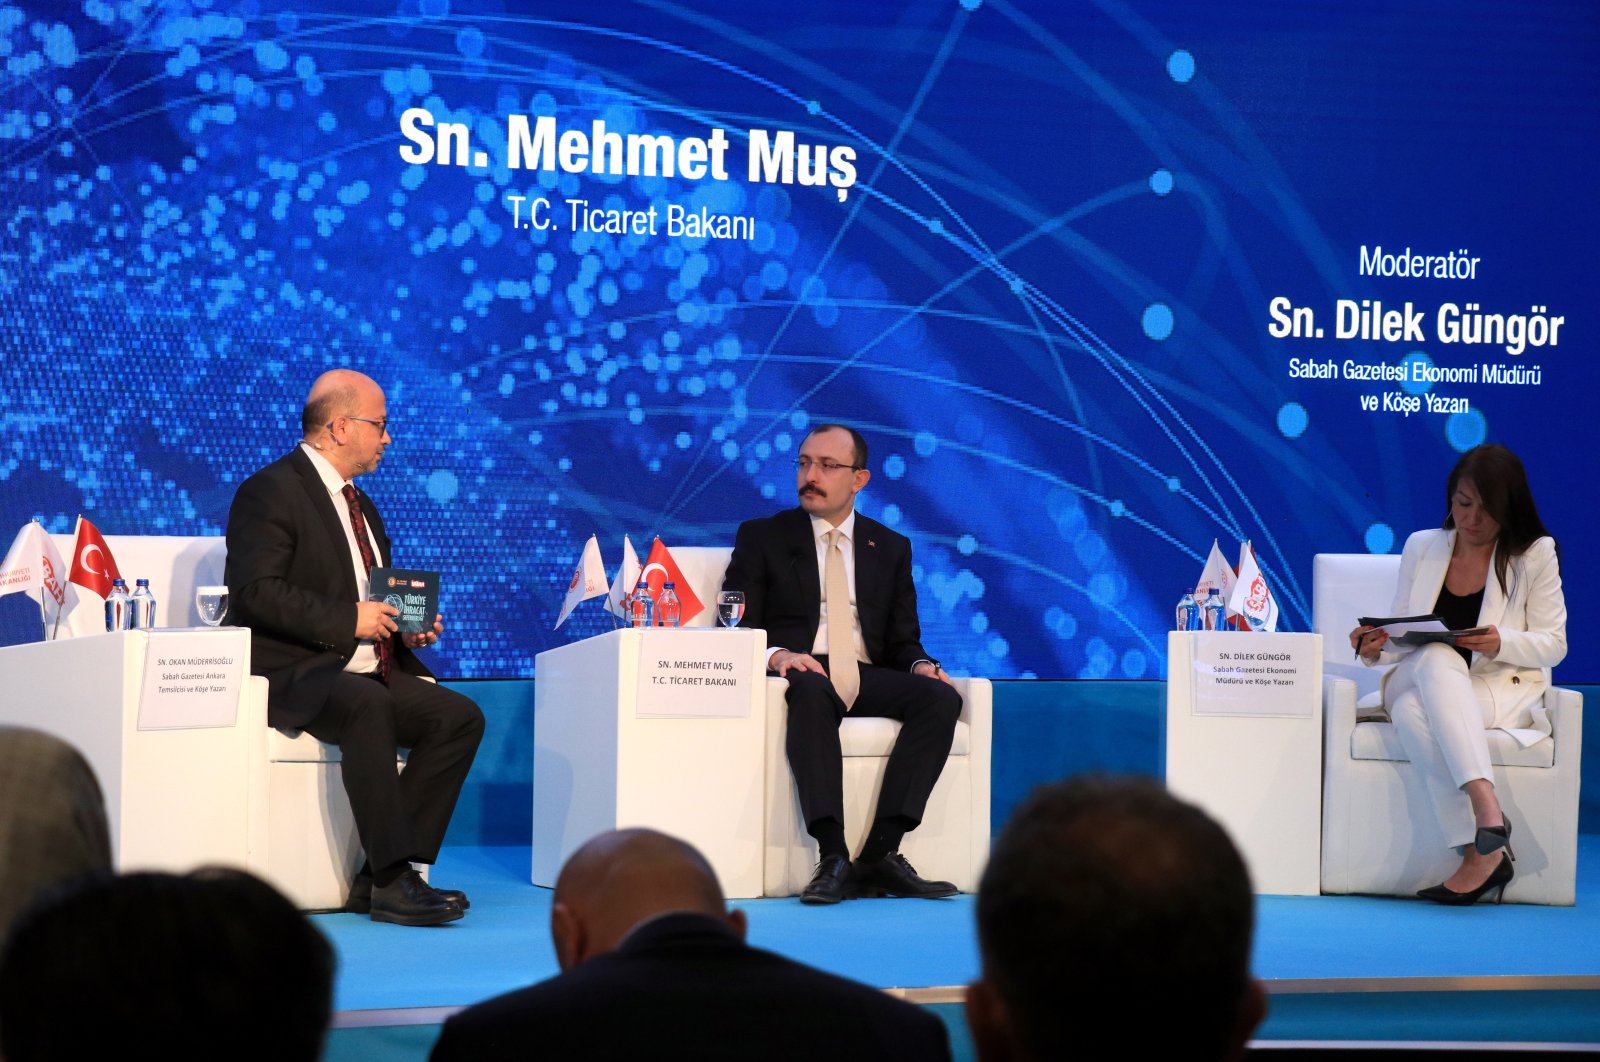 Trade Minister Mehmet Muş (C) during the second Turkey Export Mobilization summit, organized by Turkuvaz Media Group, in Konya, central Turkey, Aug. 3, 2022. (AA Photo)